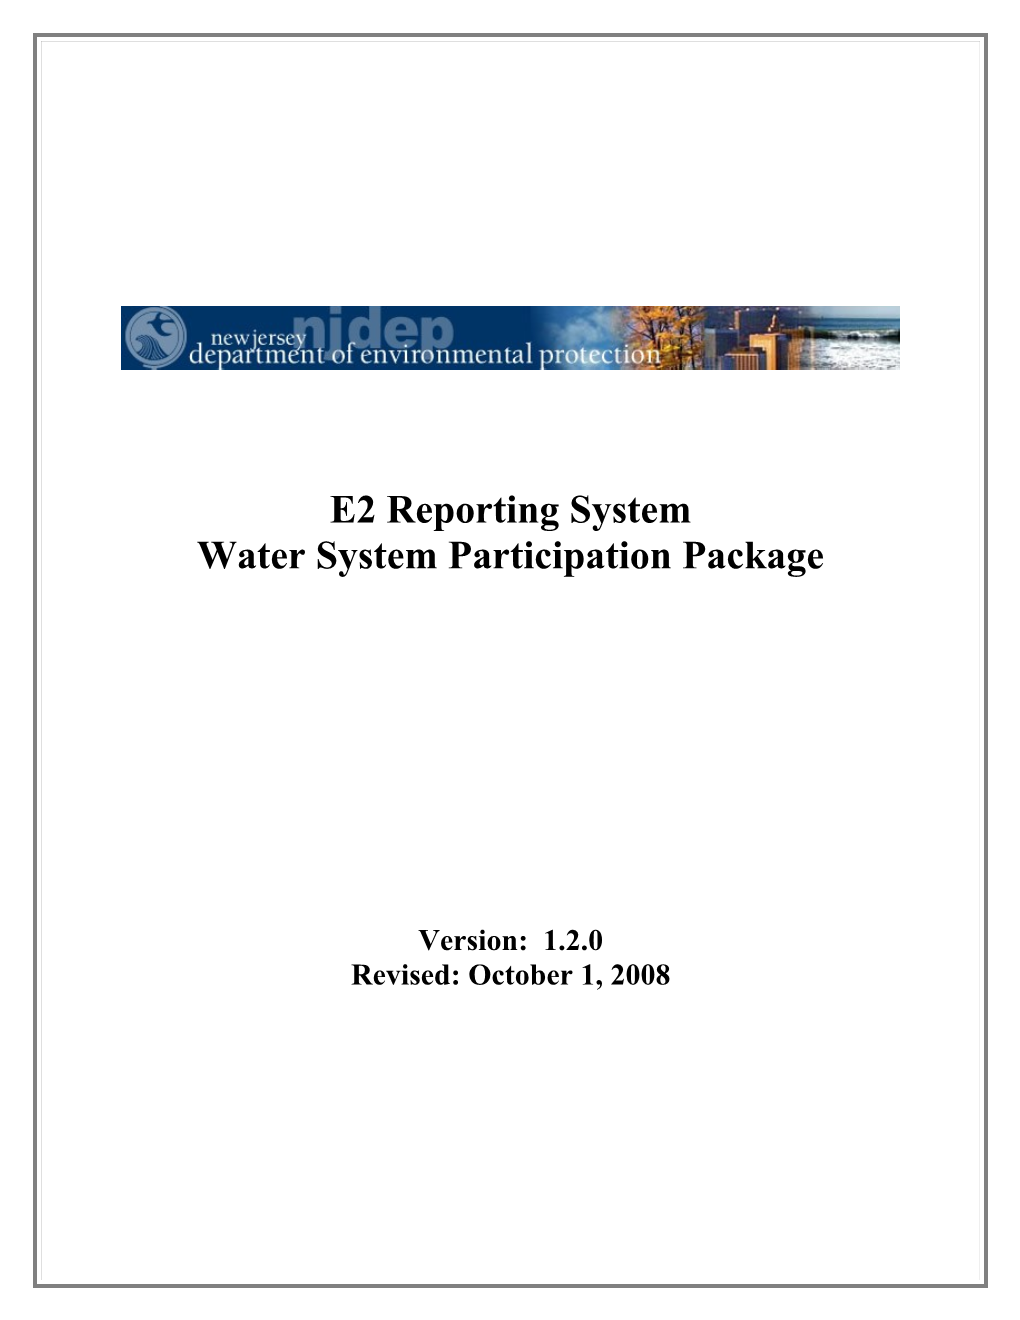 E2 Reporting System Laboratory Participation Package s1